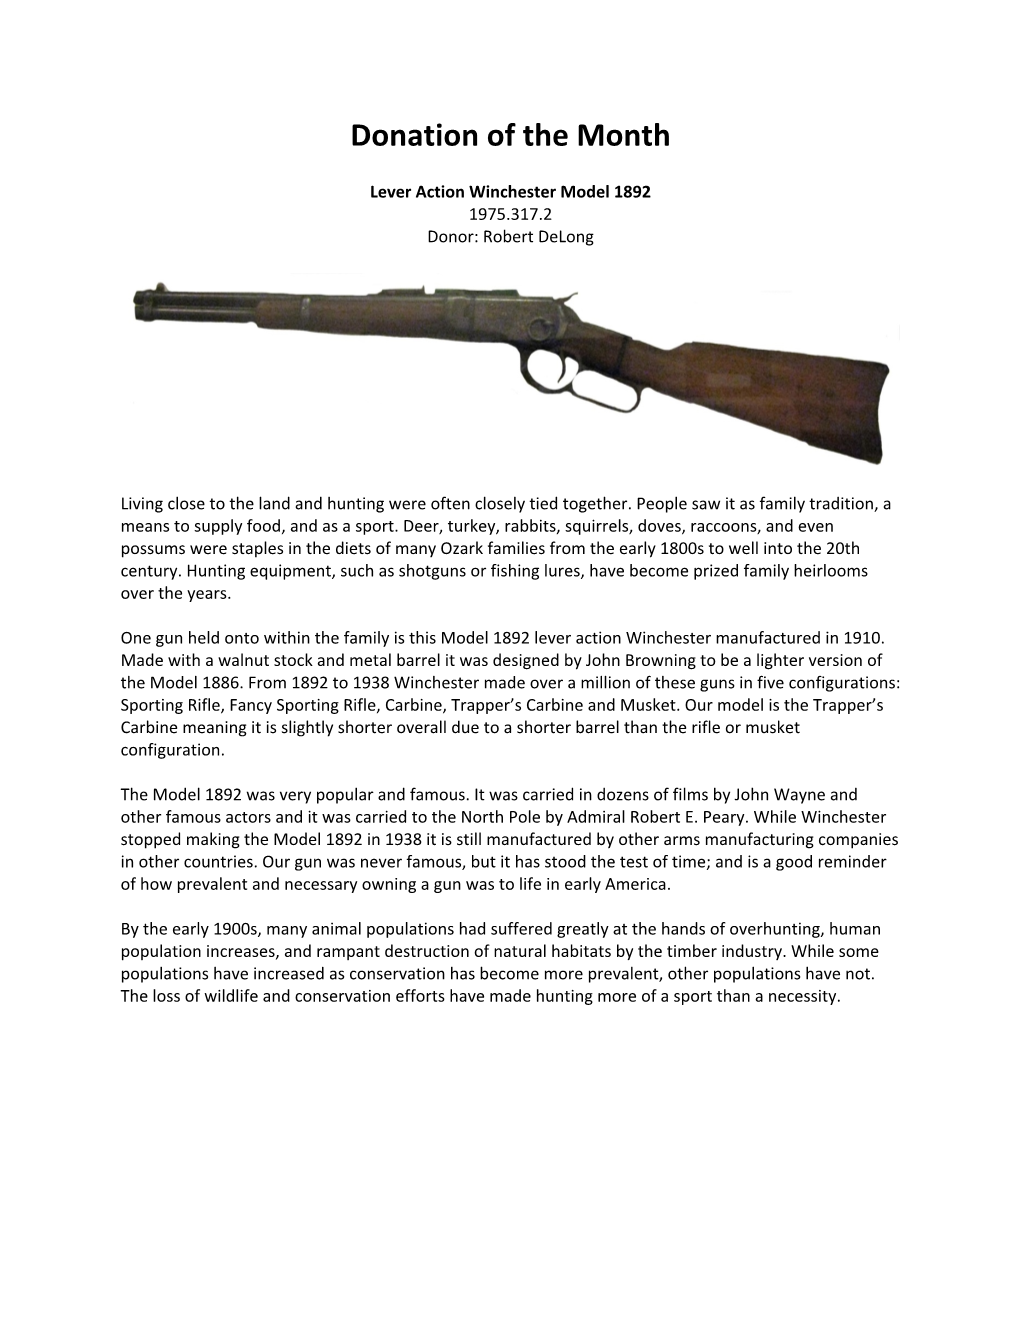 Lever Action Winchester Model 1892 1975.317.2 Donor: Robert Delong